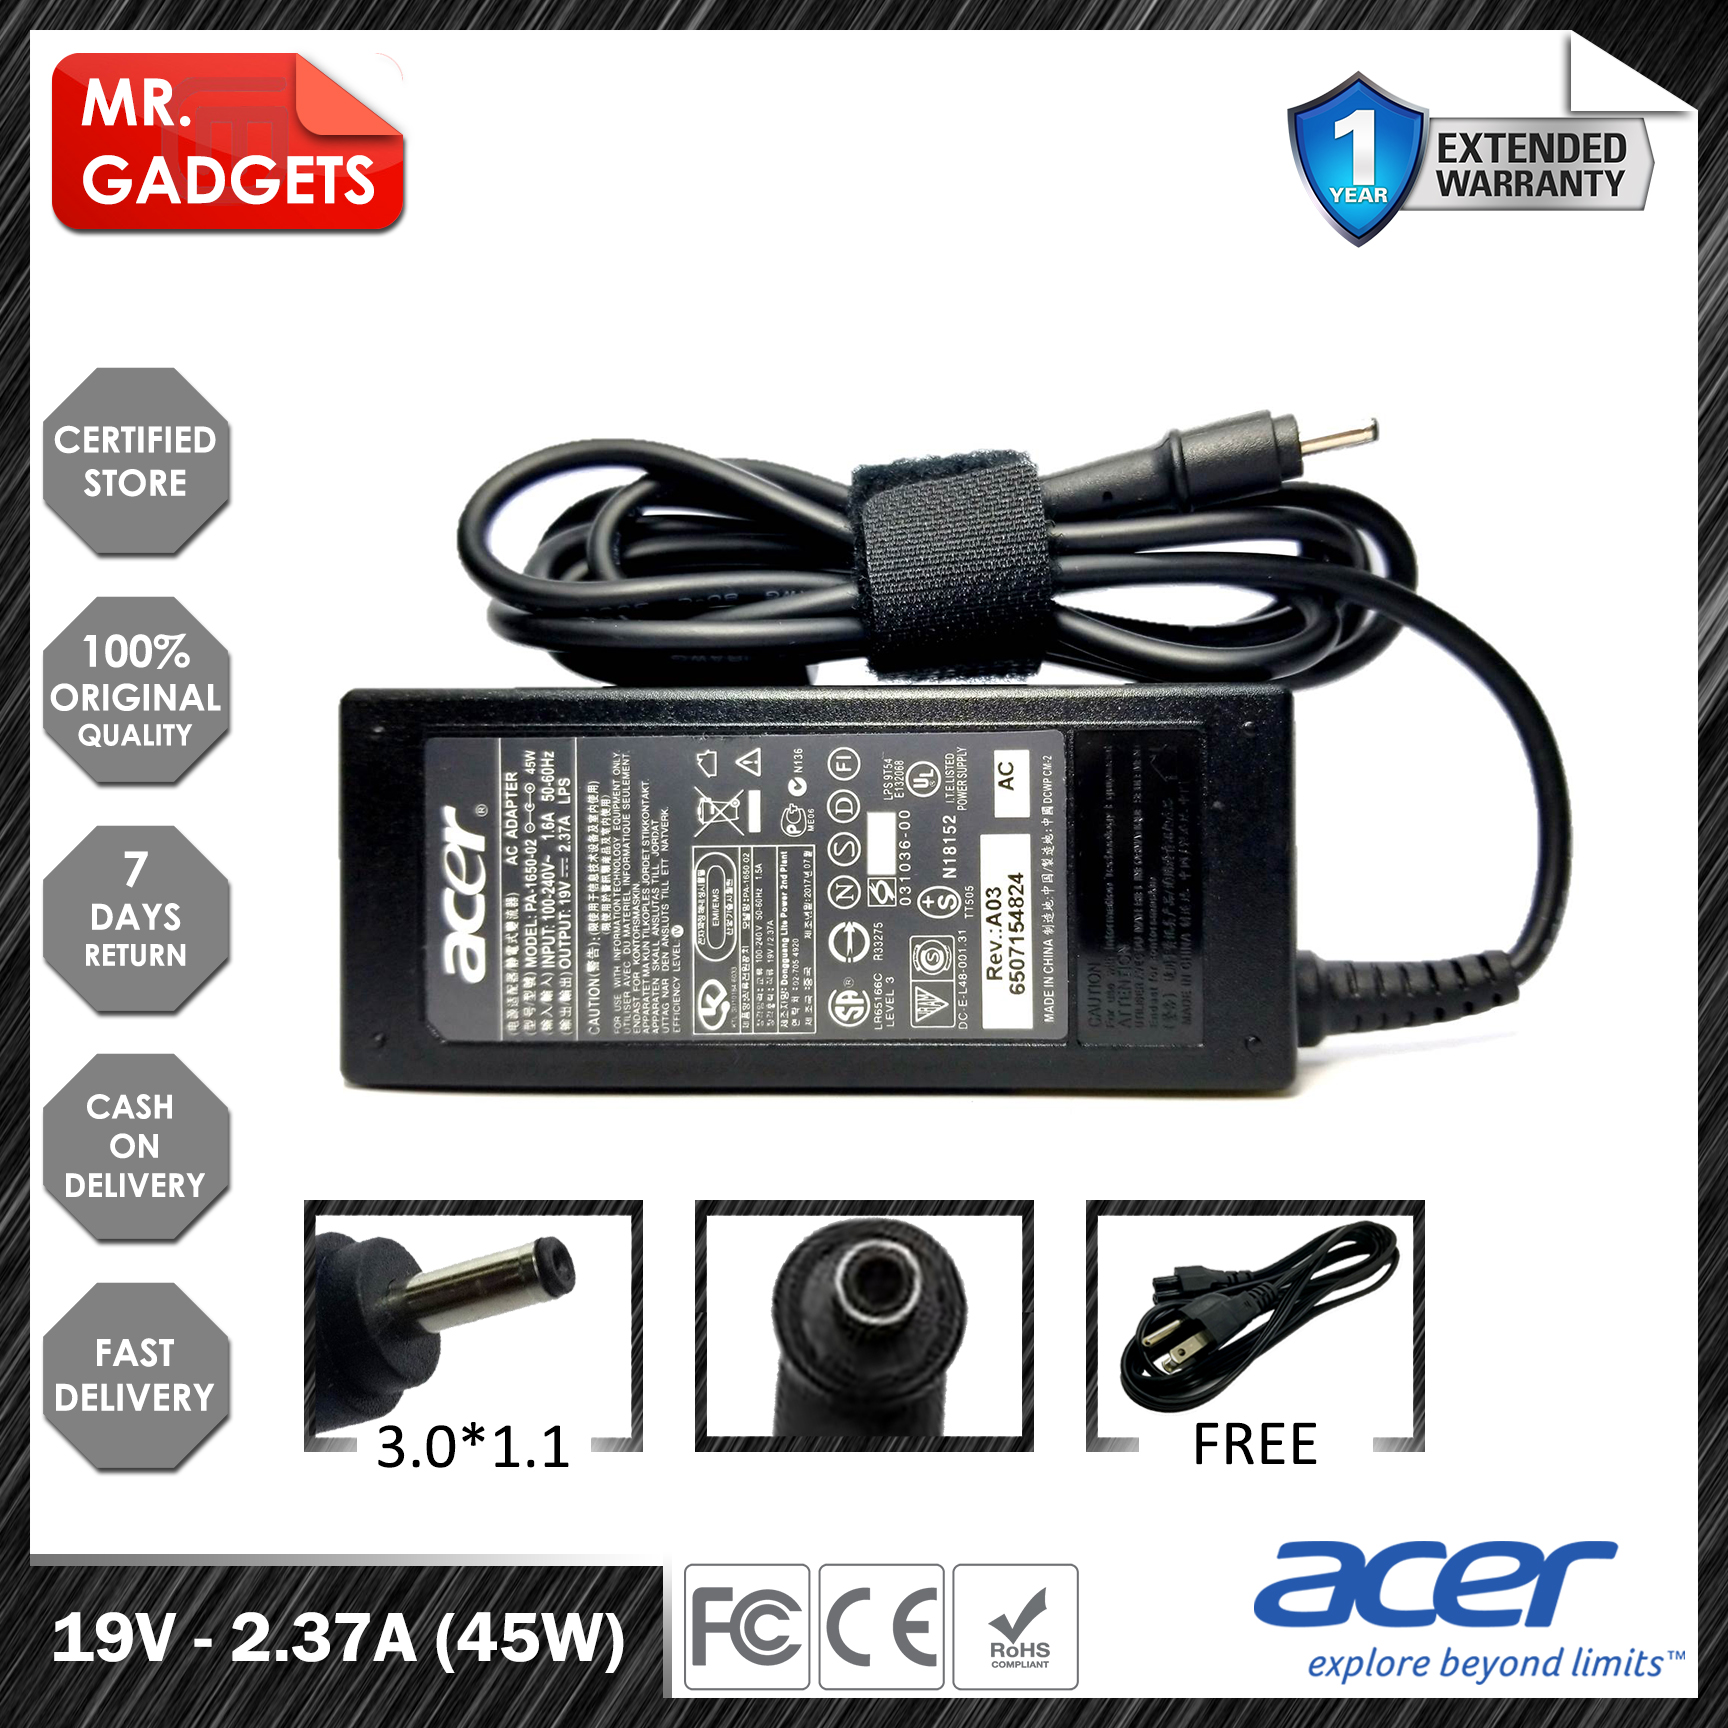 Laptop Charger Adapter for Acer Aspire Switch 11 V SW5-173, 11 V SW5-173P,  11 V SW5-173-63NV, 11 V SW5-173-648Z, 11 V SW5-173-64DH, 11 V SW5-173-65R3,  11 V SW5-173-6742, 11 V SW5-173P-6603 /